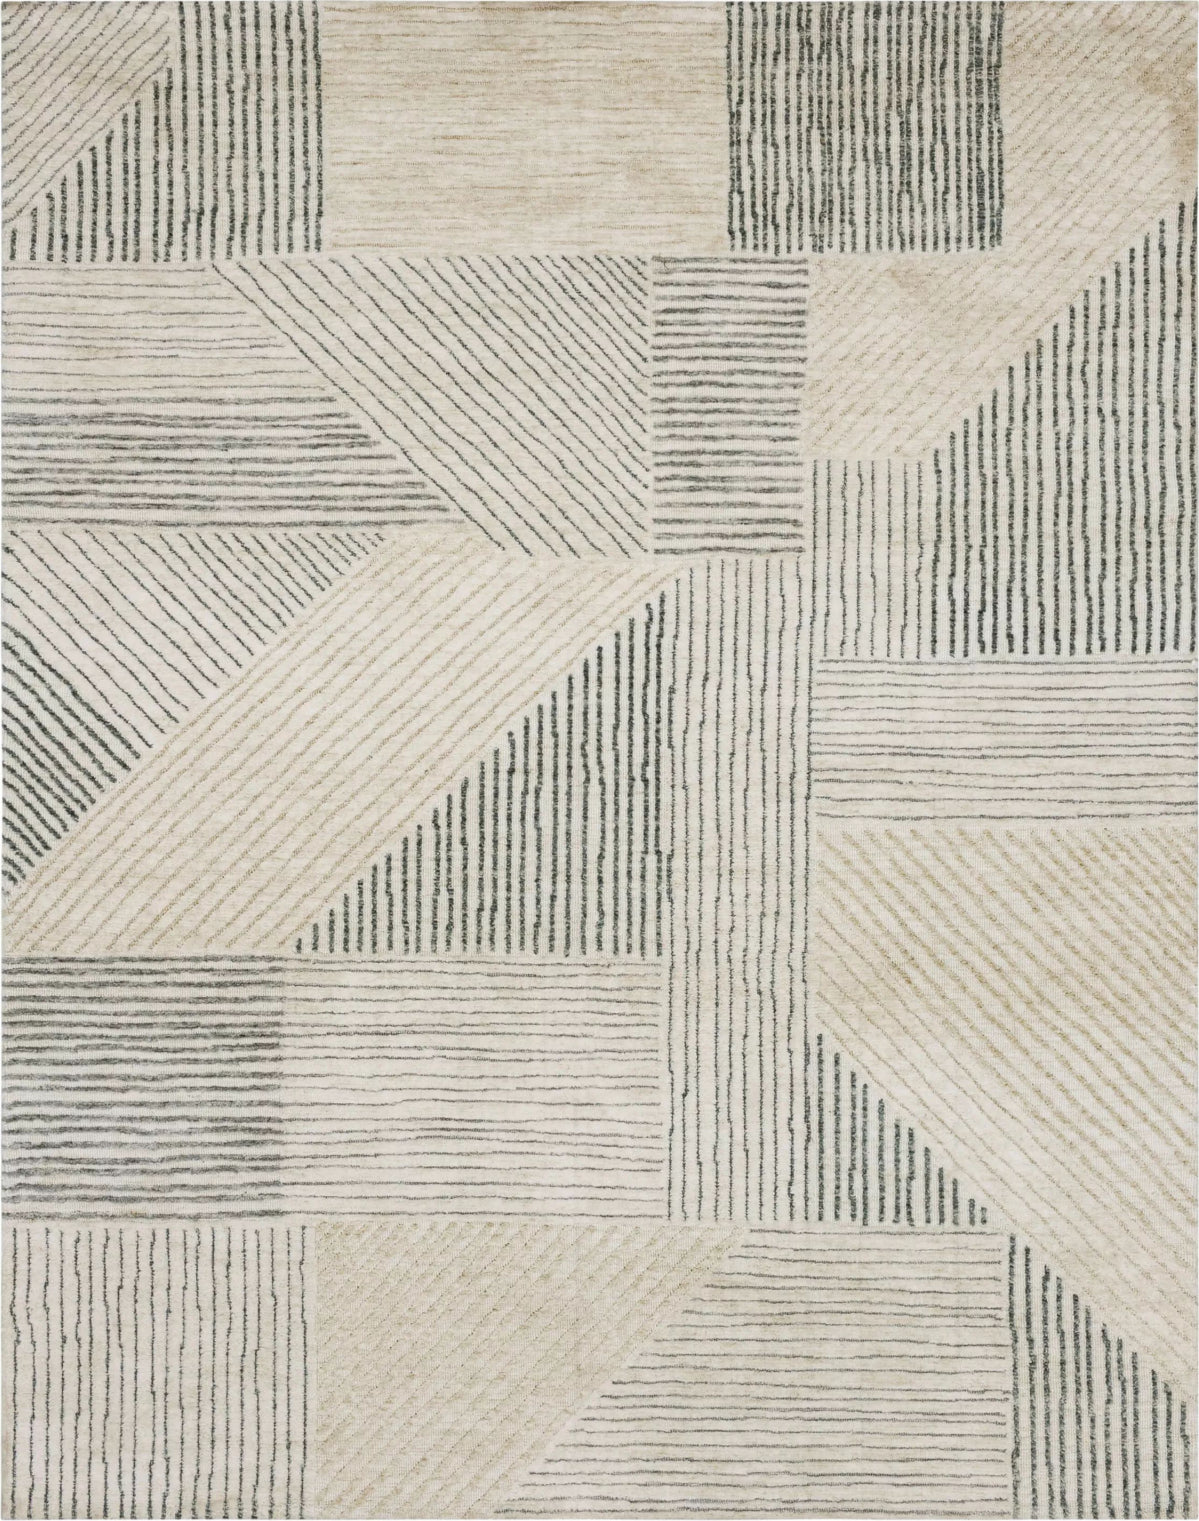 Karastan Bowen Central Valley Tan Area Rug by Drew and Jonathan main image